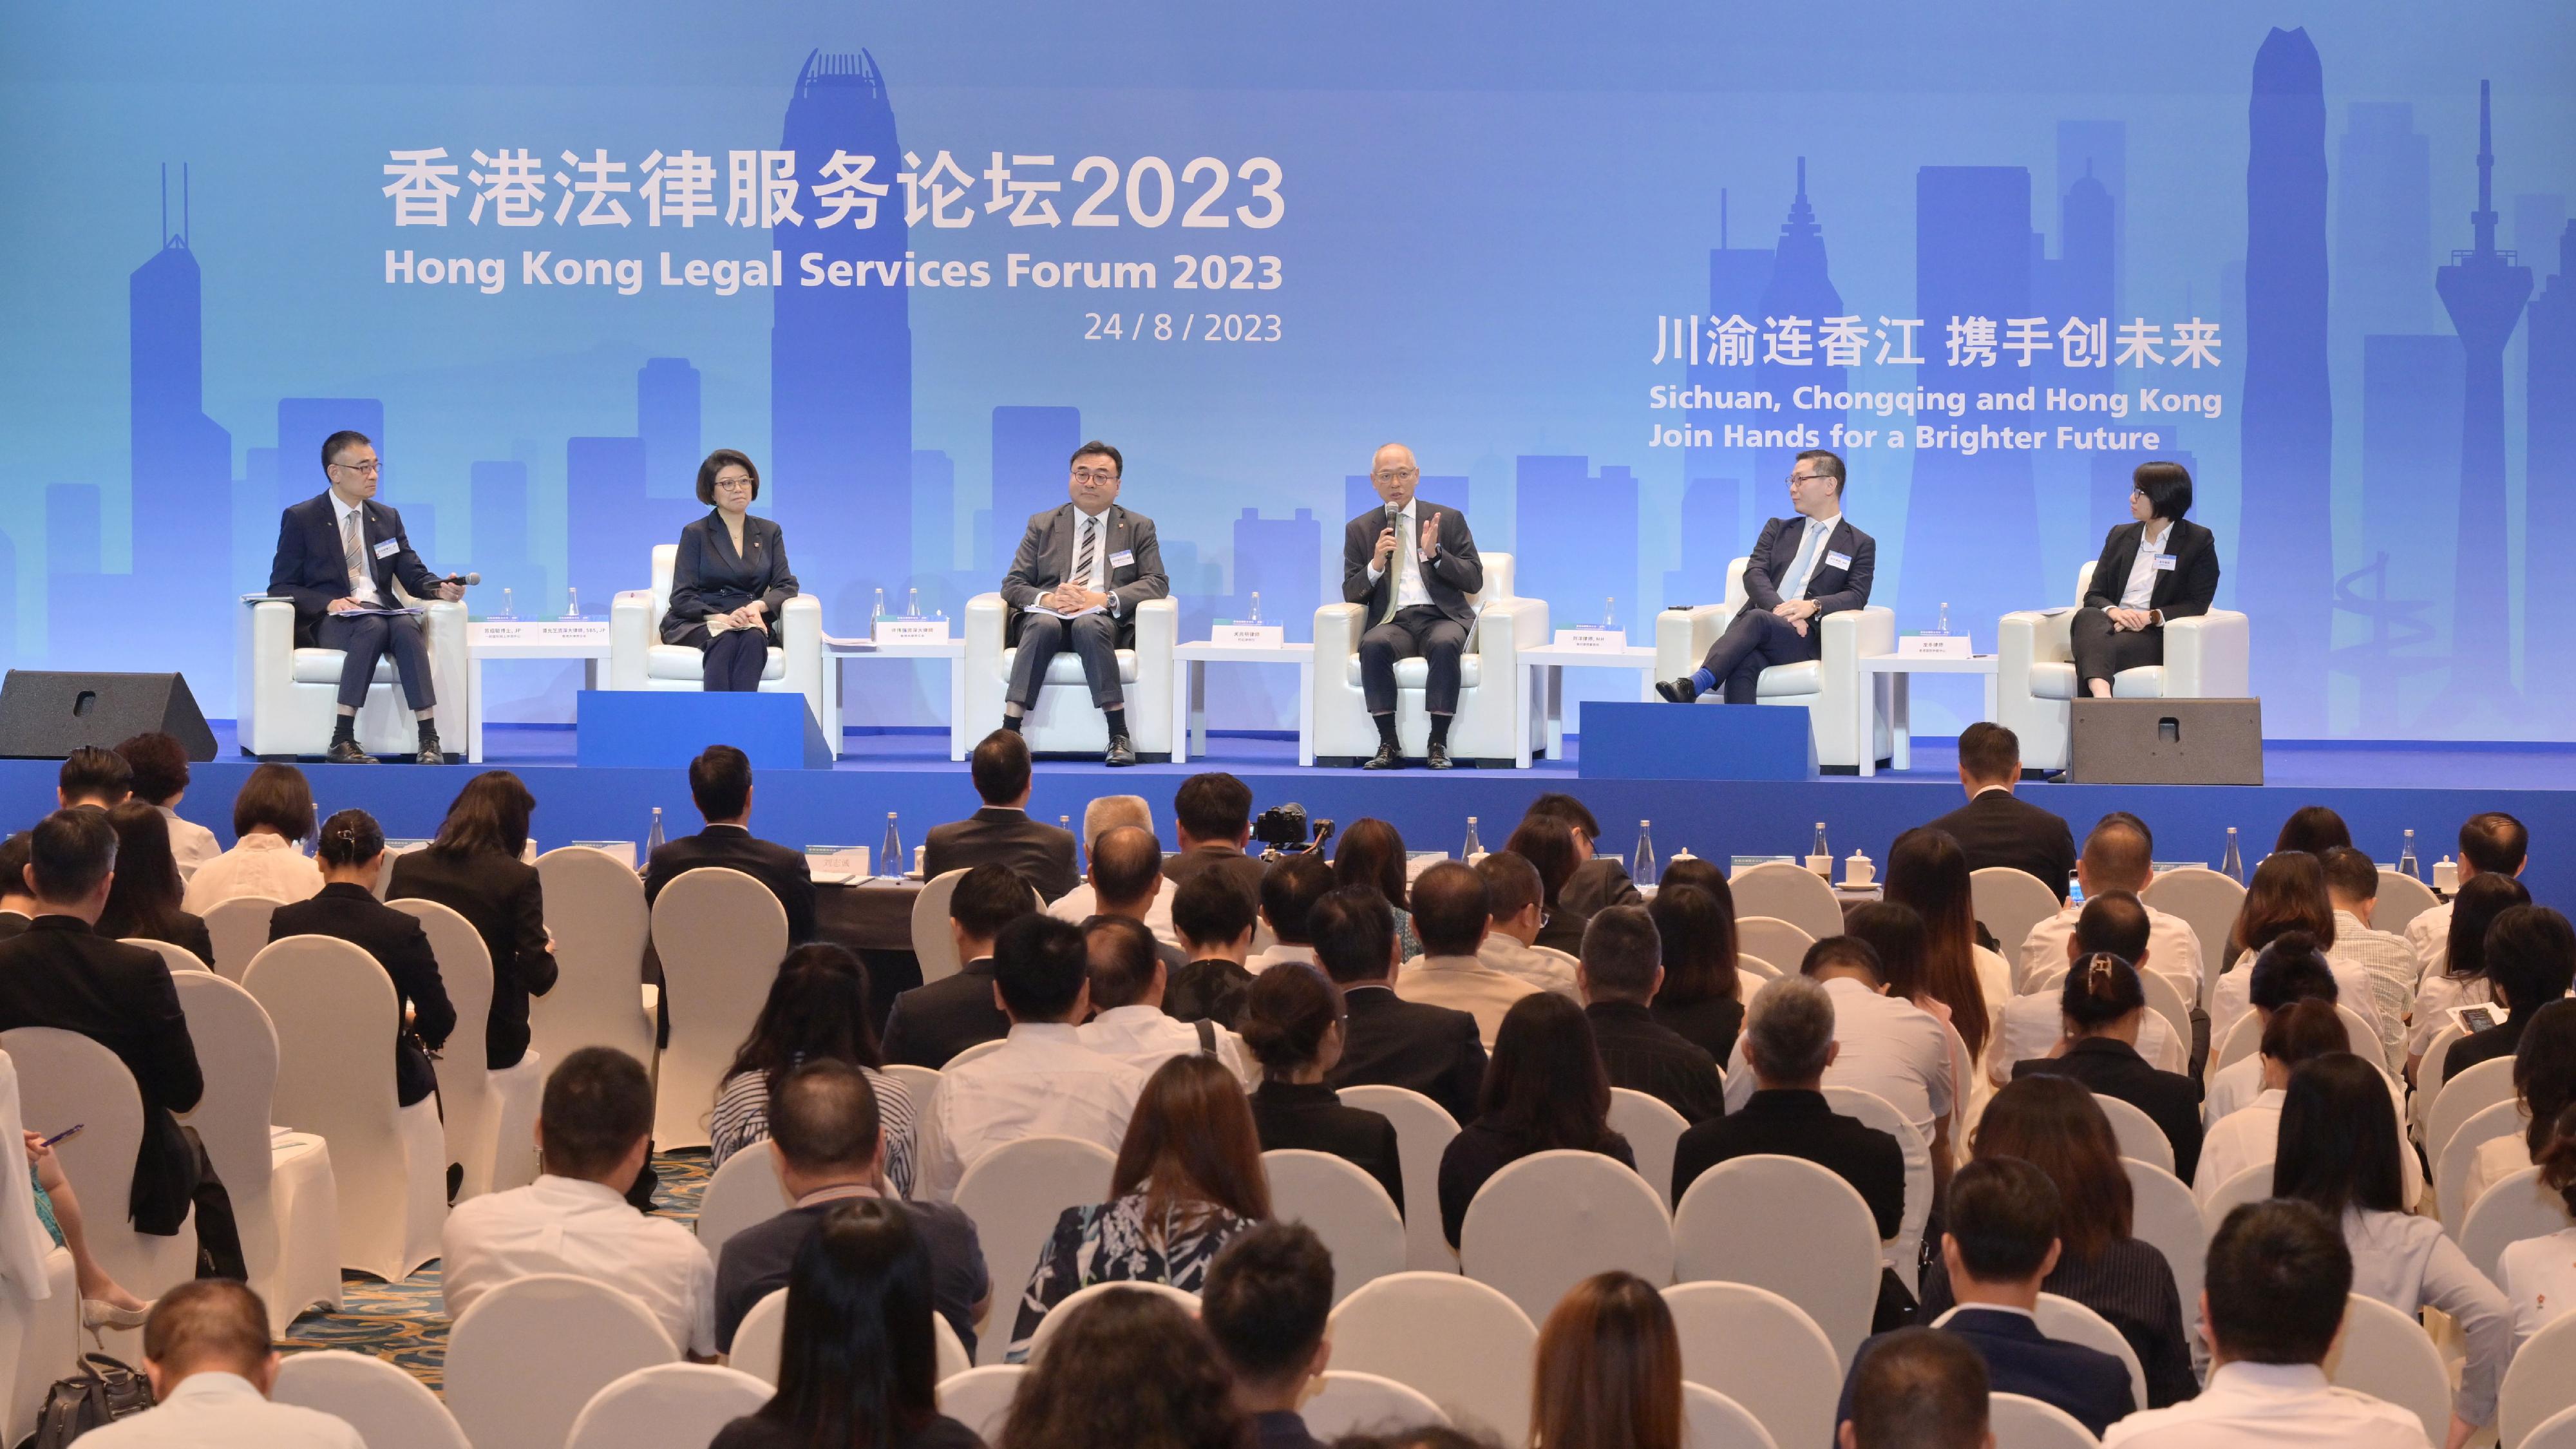 The sixth Hong Kong Legal Services Forum organised by the Department of Justice and co-organised by the Hong Kong Trade Development Council was held in Chengdu today (August 24). Photo shows renowned speakers from the legal and dispute resolution sector sharing their views at plenary session two on cross-border commercial dispute resolution services.